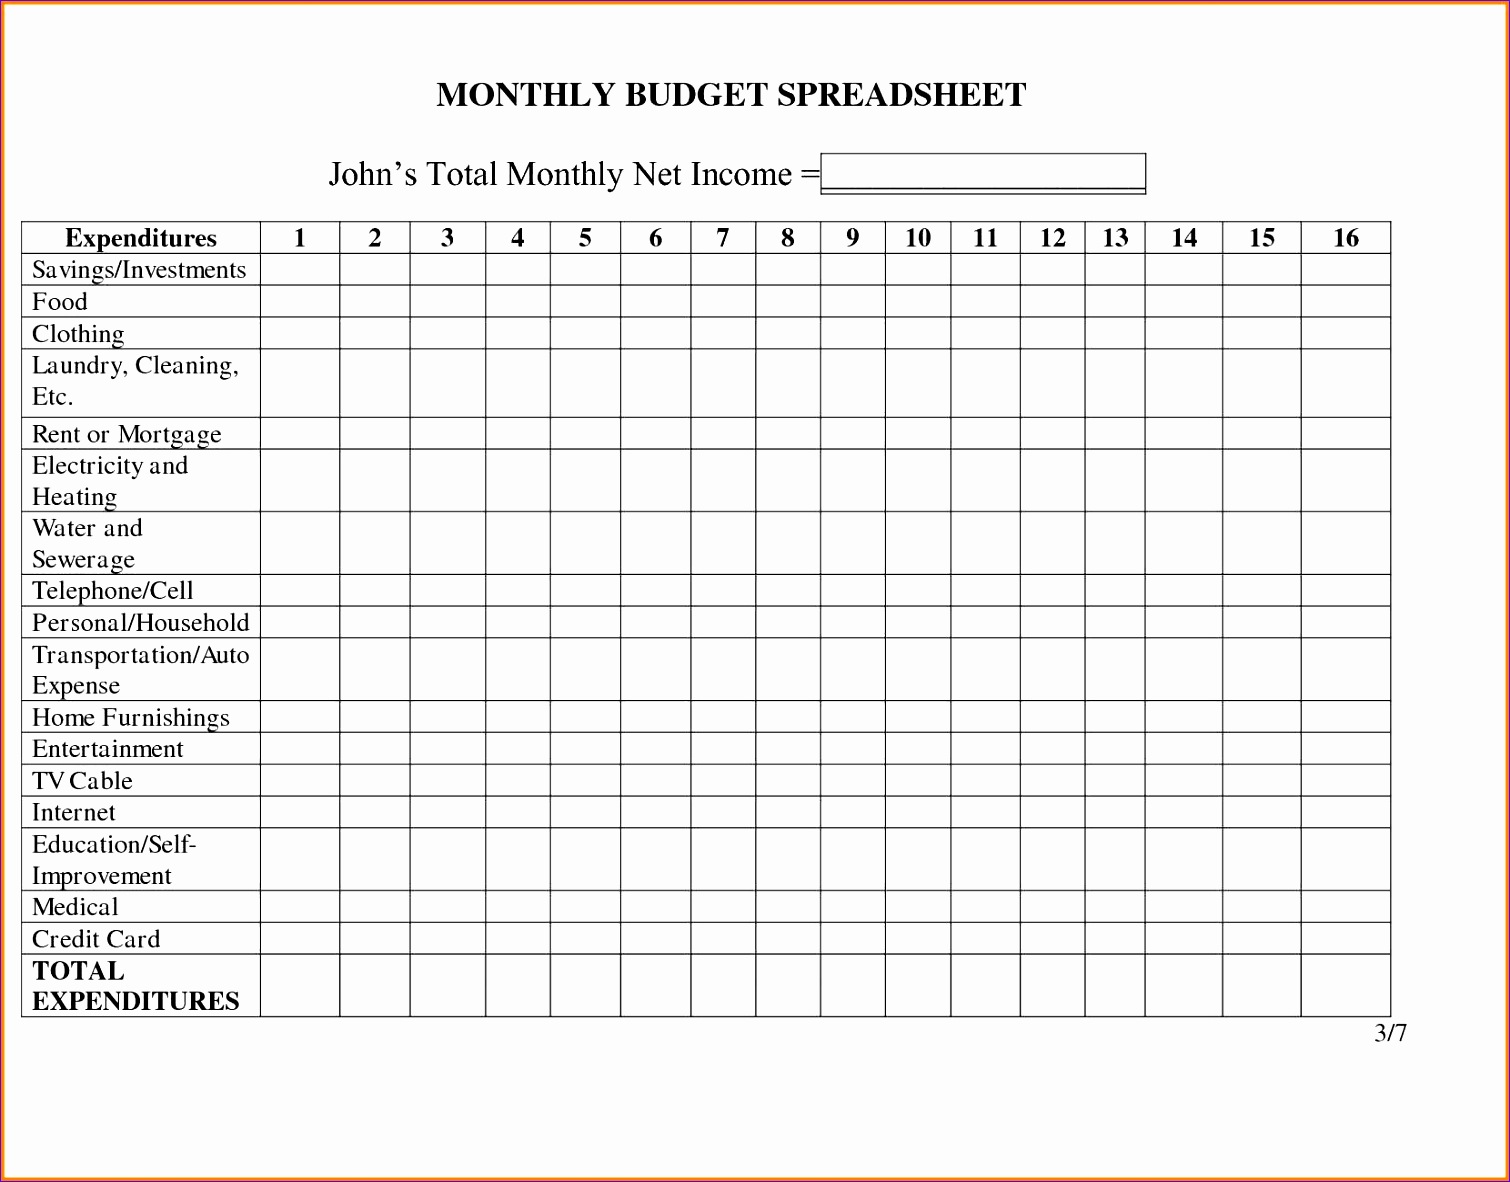 exquisite in e and expenses spreadsheet template for small business monthly expense worksheet free bud exce divorce printable pdf loan modification bank of america excel